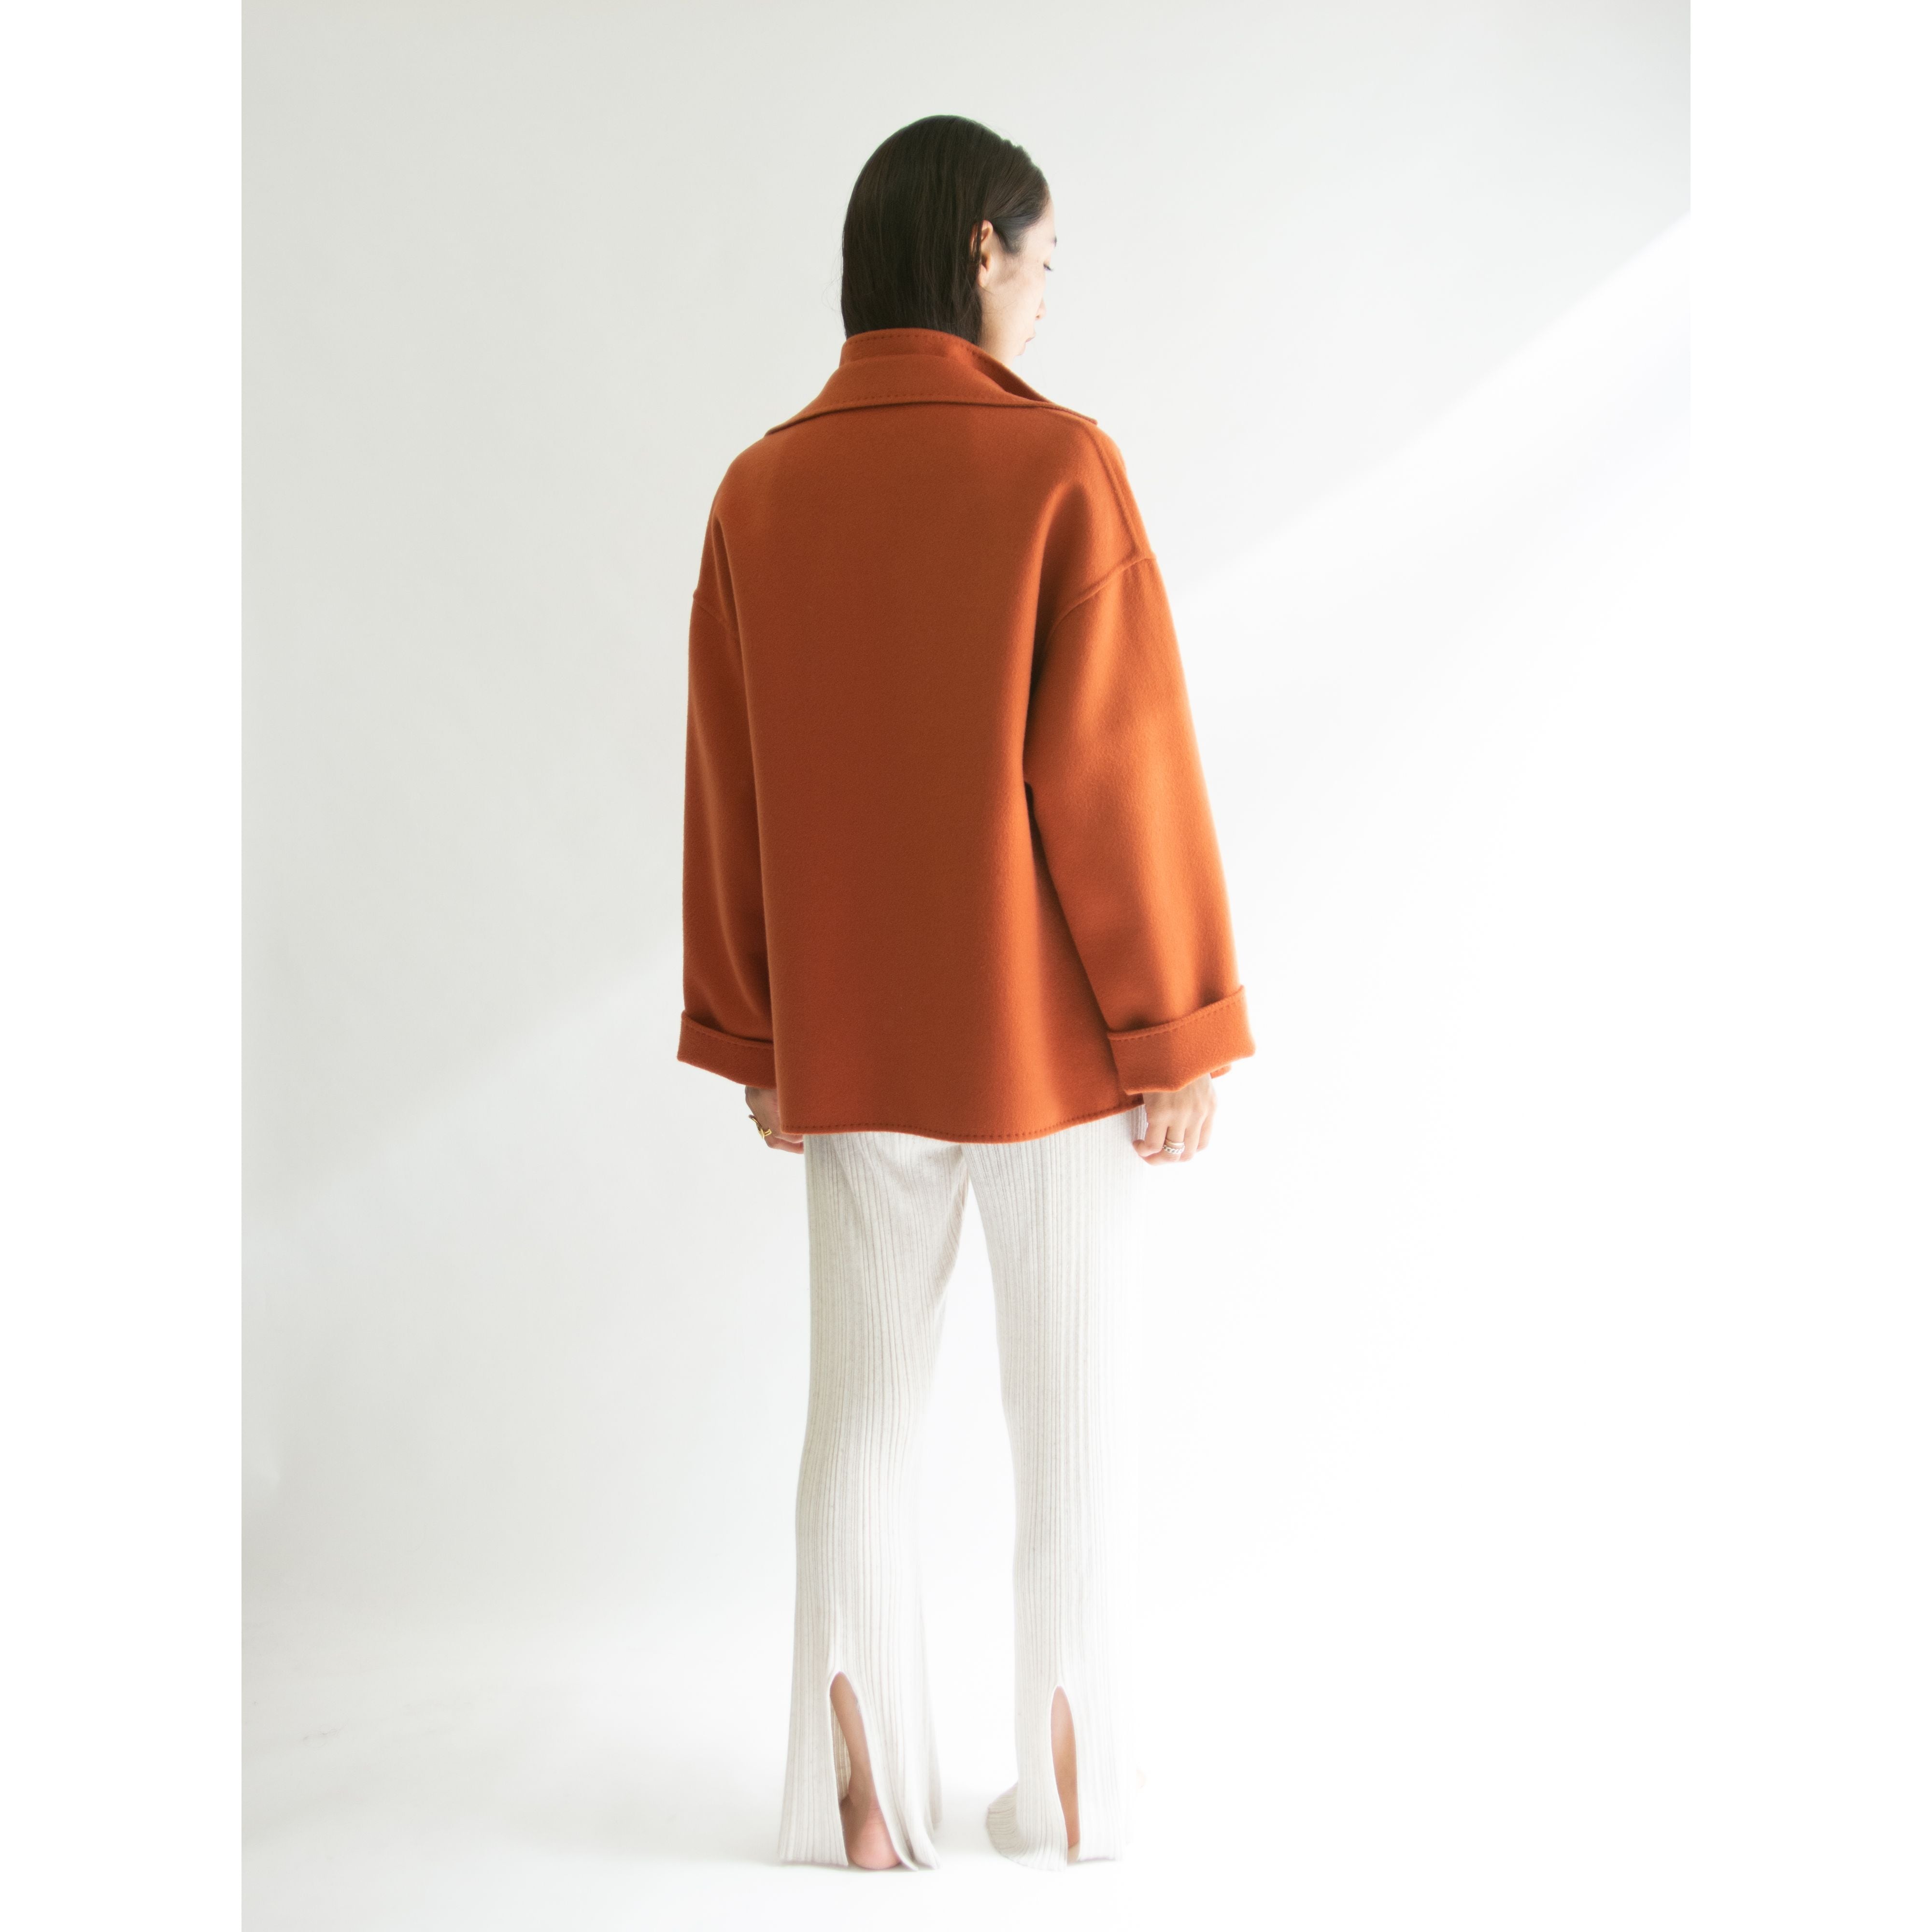 DUSAN】Made in Italy 100% Cashmere Blanket Jacket（ドゥサン